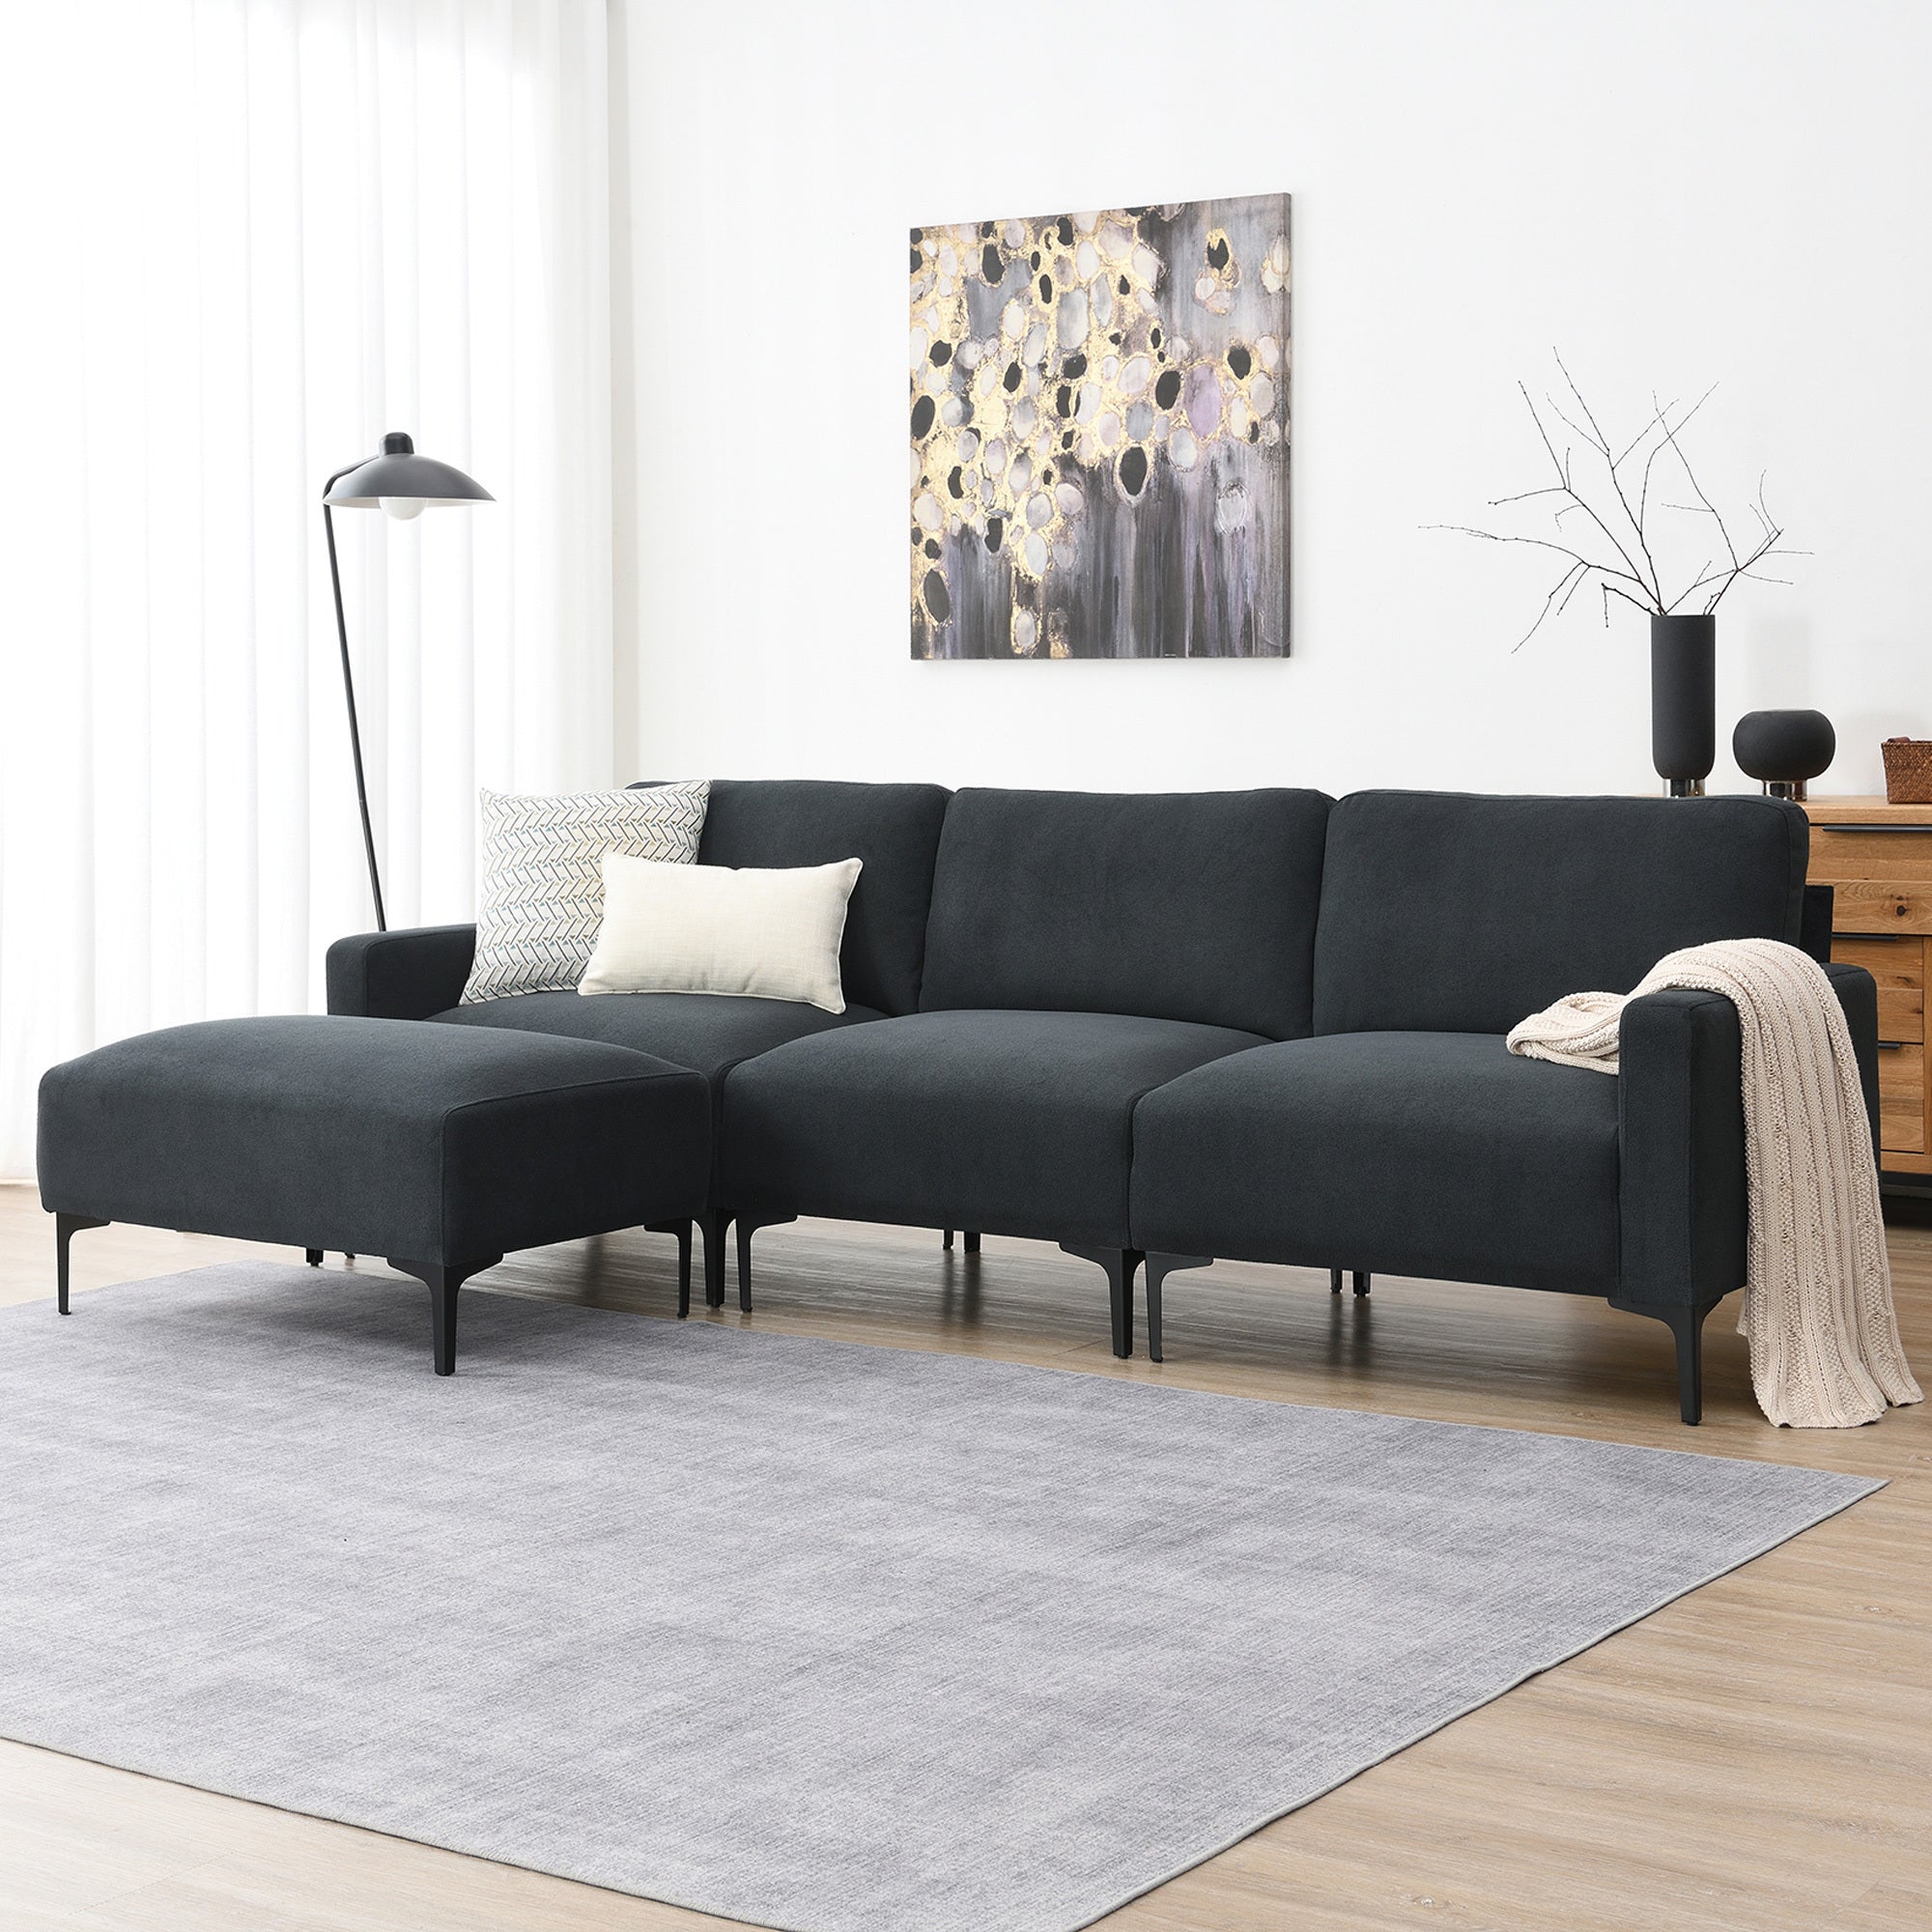 🆓🚛 103.5" Modern L-Shaped Sectional Sofa, 4-Seat Velvet Fabric Couch Set With Convertible Ottoman, Freely Combinable Sofa for Living Room, Apartment, Office, Apartment, Gray